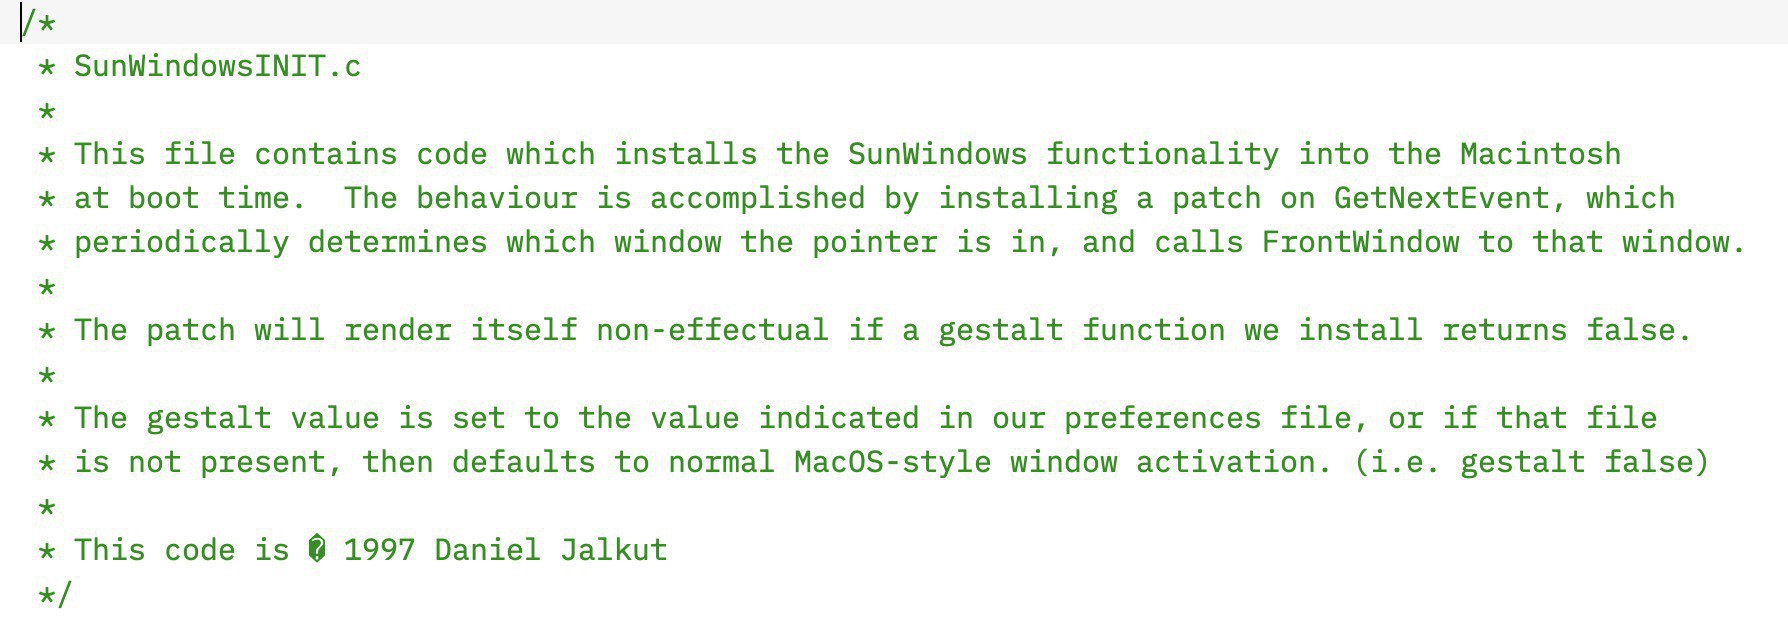 Screenshot of source code with comments: "This file contains code which installs the SunWindows functionality into the Macintosh&10;at boot time.  The behaviour is accomplished by installing a patch on GetNextEvent, which&10;periodically determines which window the pointer is in, and calls FrontWindow to that window.&10;The patch will render itself non-effectual if a gestalt function we install returns false.&10;The gestalt value is set to the value indicated in our preferences file, or if that file &10;is not present, then defaults to normal MacOS-style window activation. (i.e. gestalt false)&10;This code is � 1997 Daniel Jalkut"